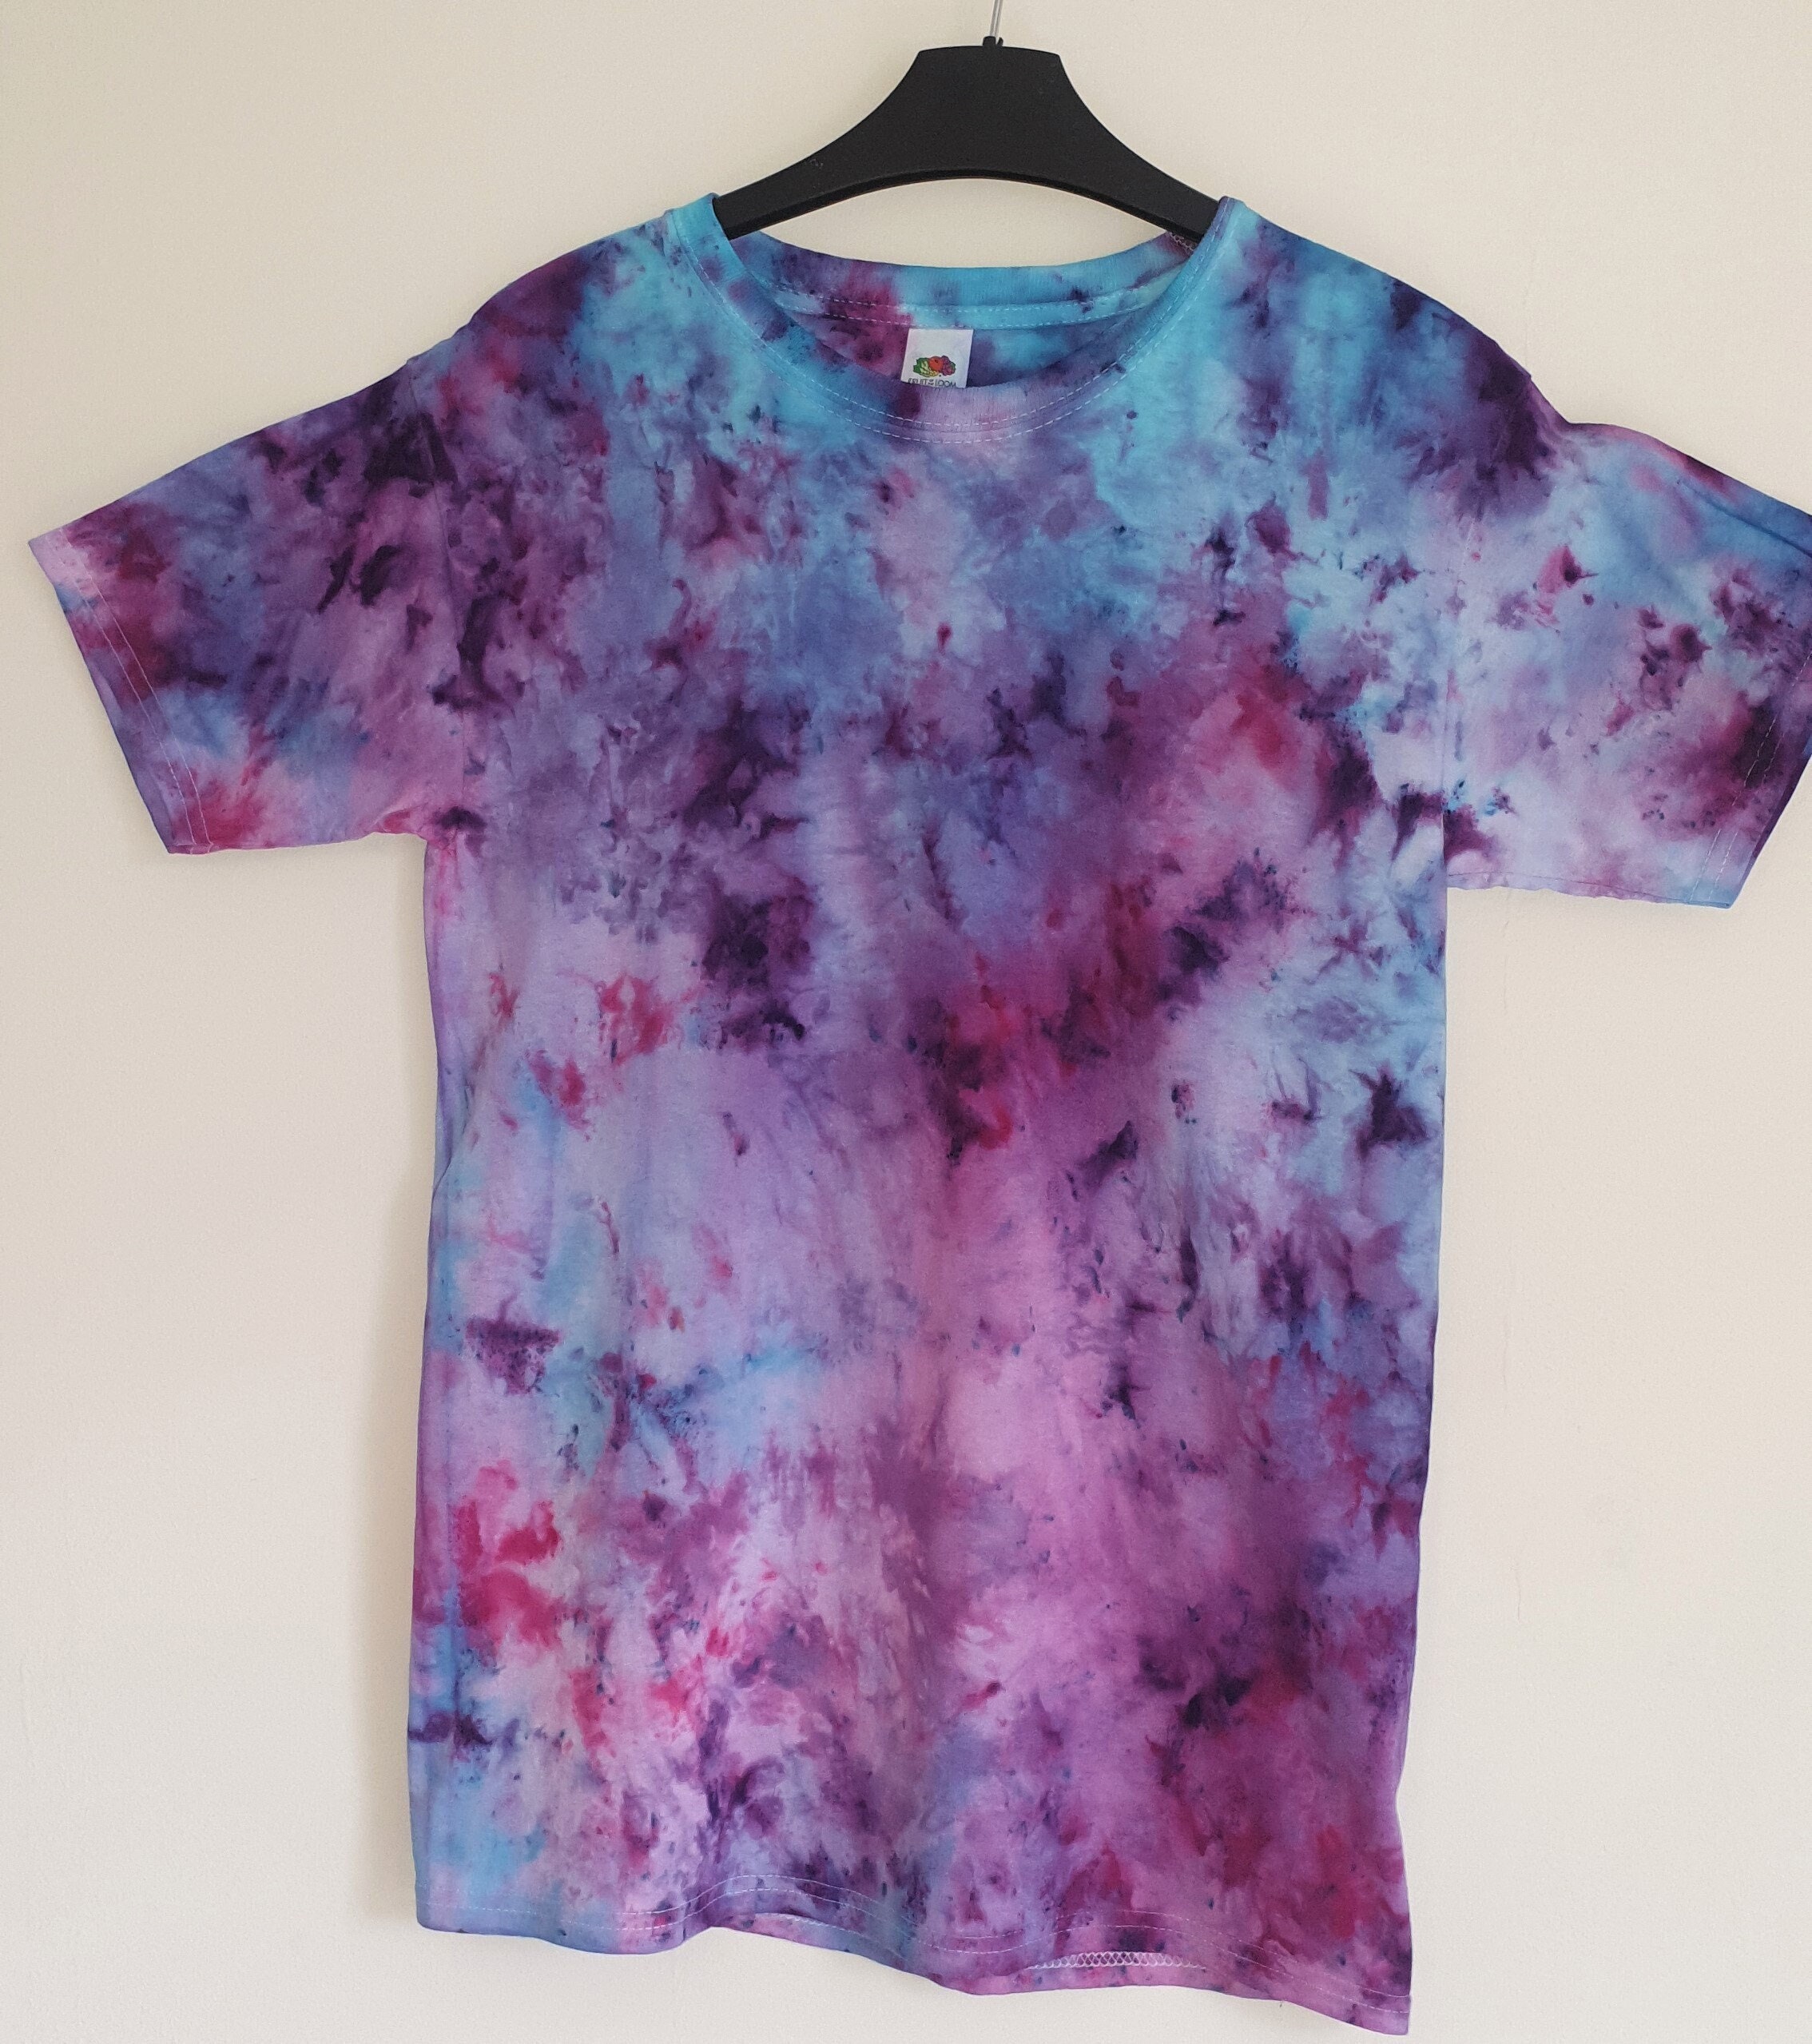 PeaceManClothing Galaxy Inspired Ice Tie Dye T-Shirt - Available in Short Sleeved, Long Sleeved, Women's Vest and Kids Designs